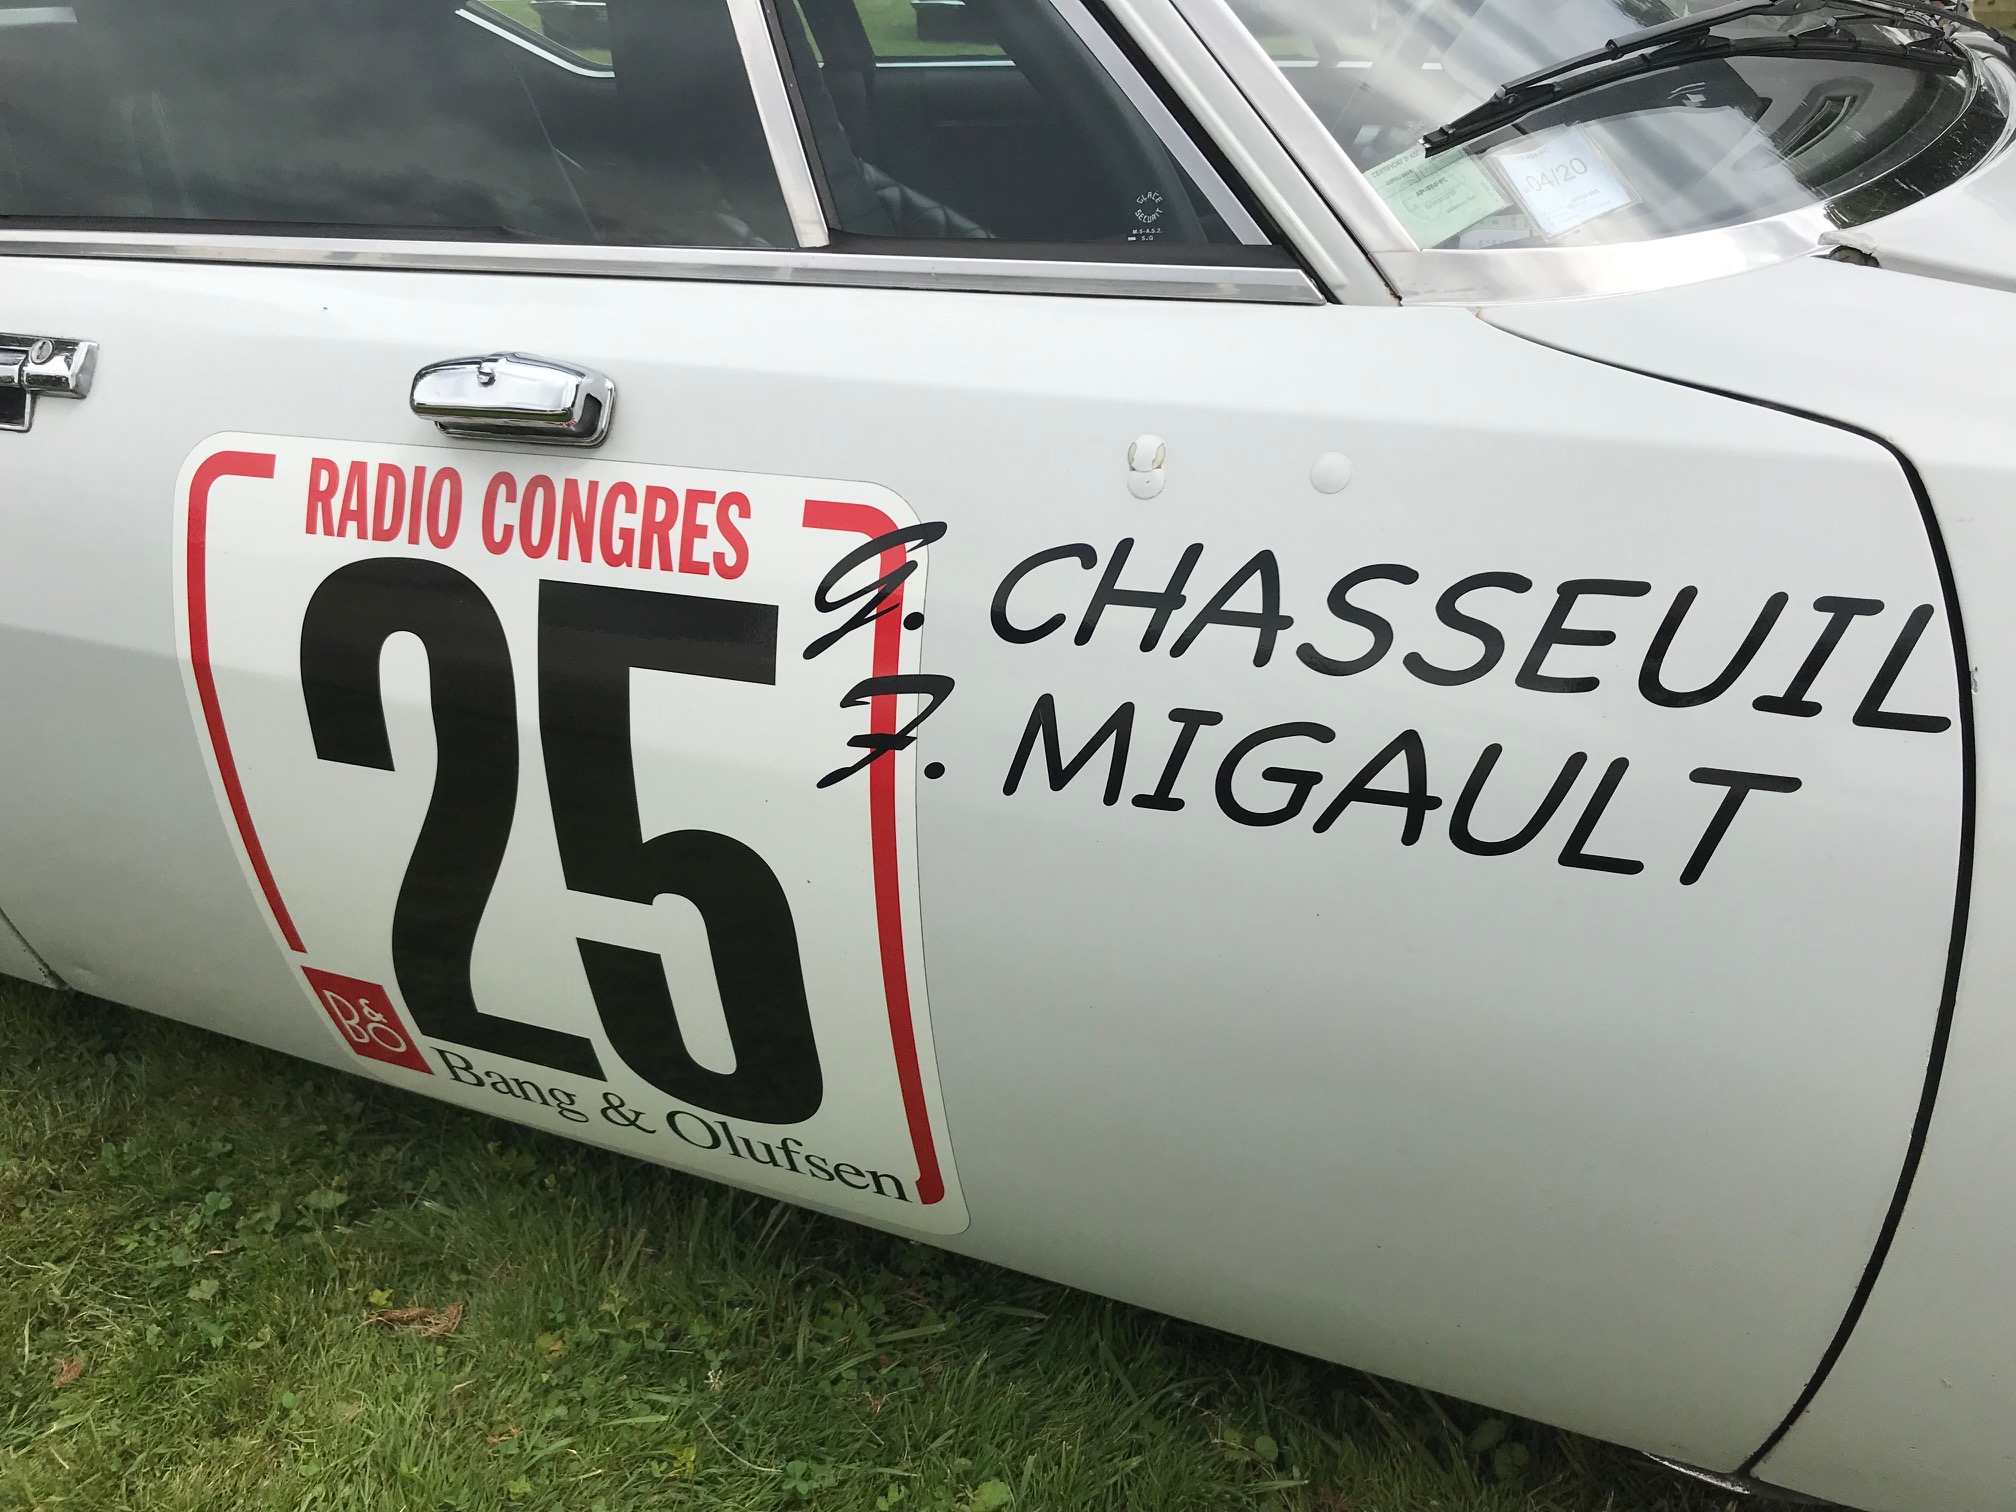 Classic & Sports Car – Talbot-Lago is cream of the crop in Chantilly